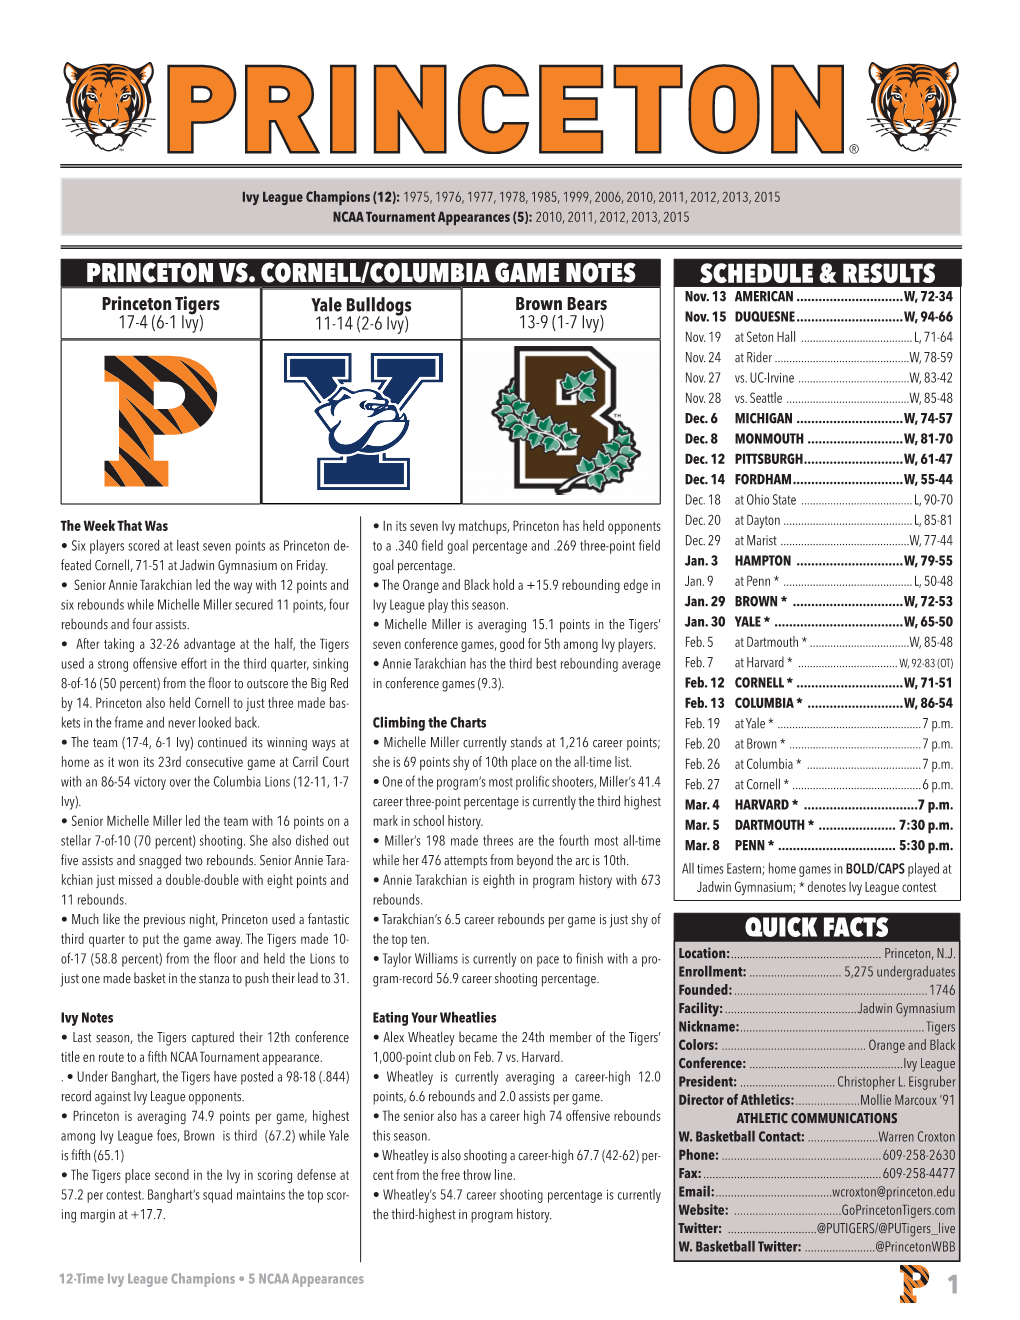 1 Quick Facts Schedule & Results Princeton Vs